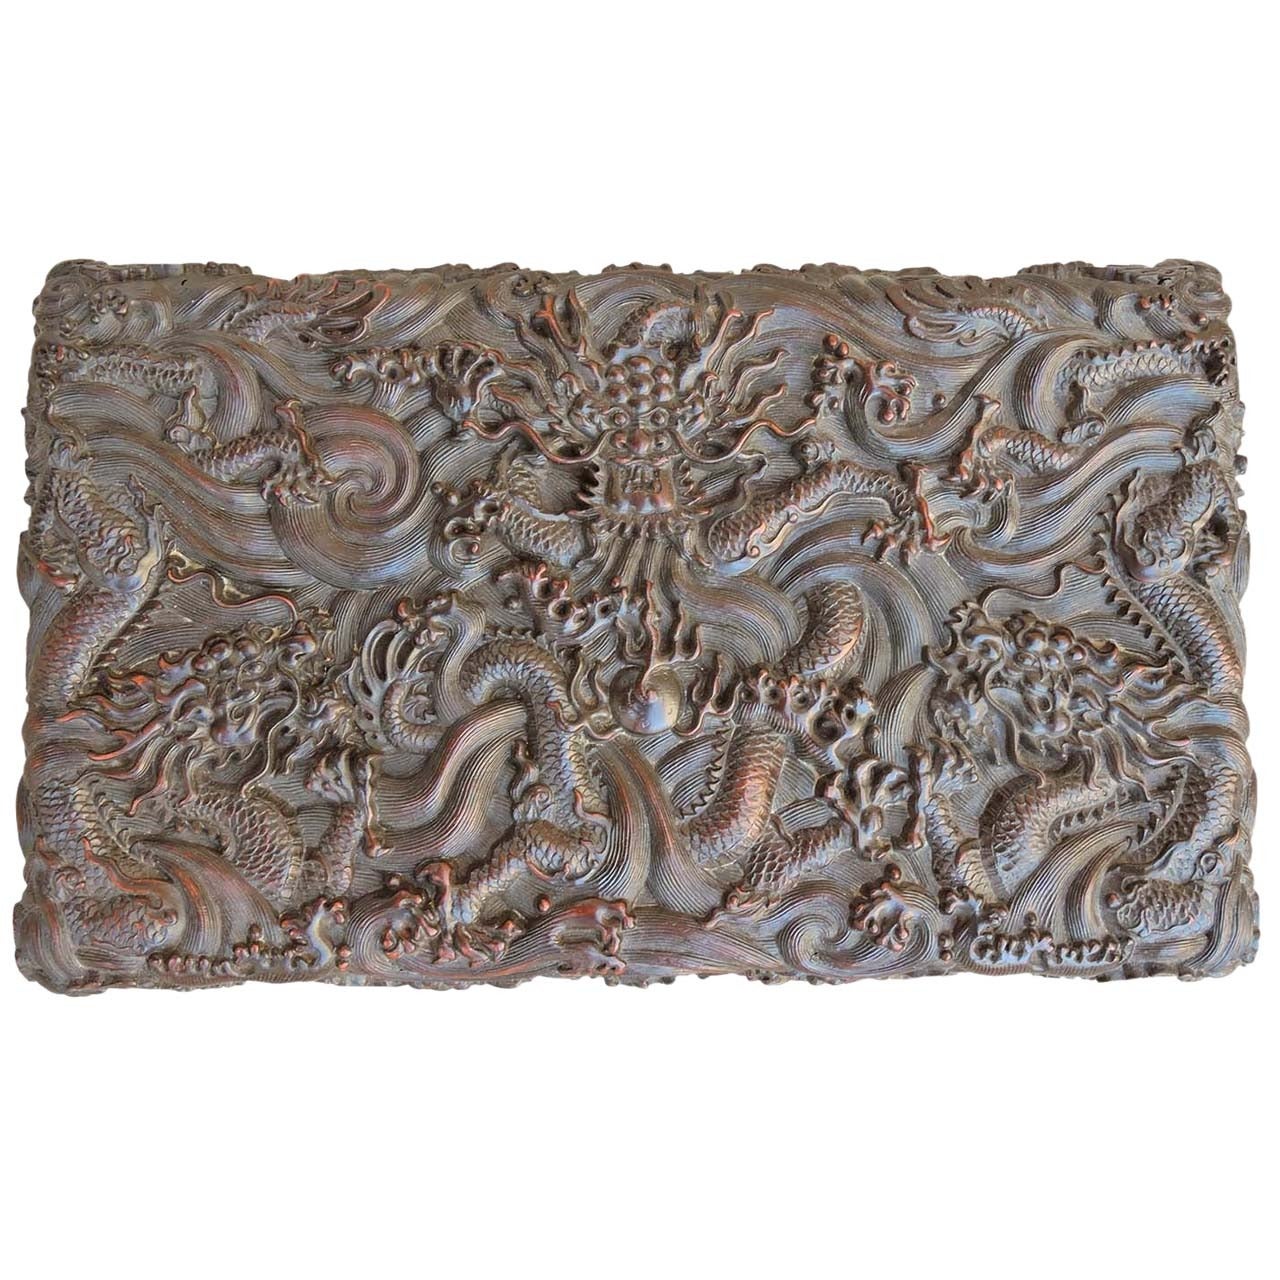 Exceptional Antique Carved Chinese Rosewood Dragon Box